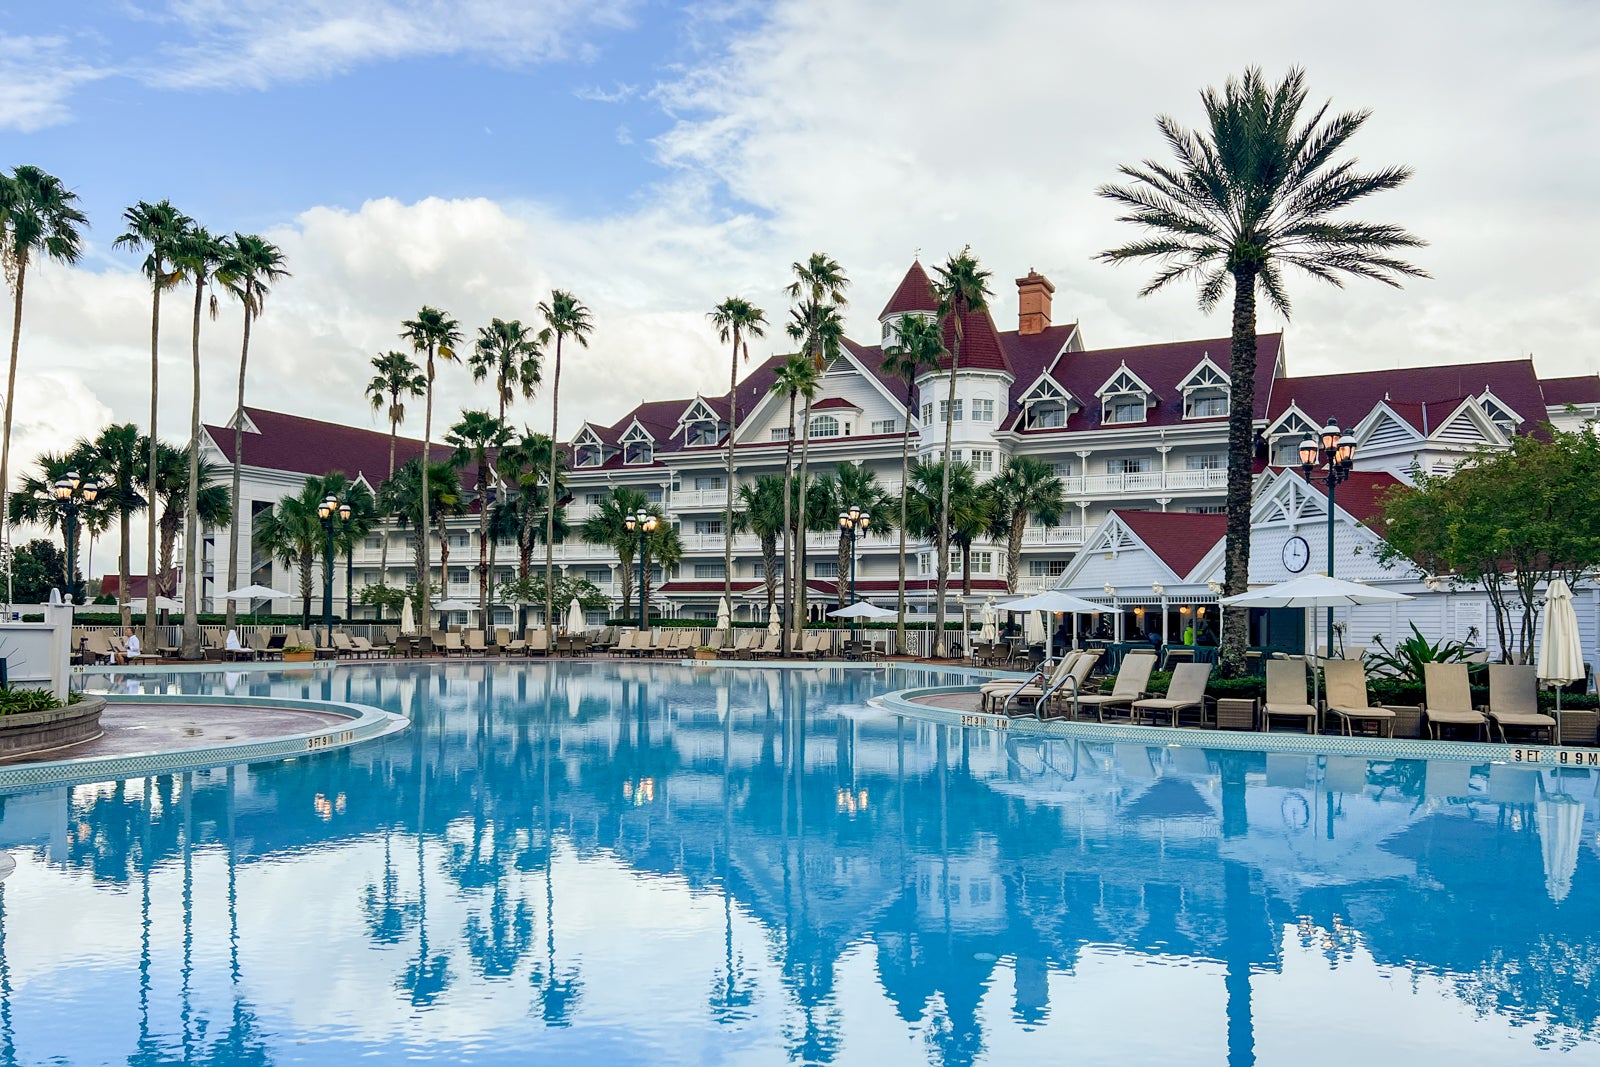 8 things to know before you decide to stay at Disney's Grand Floridian